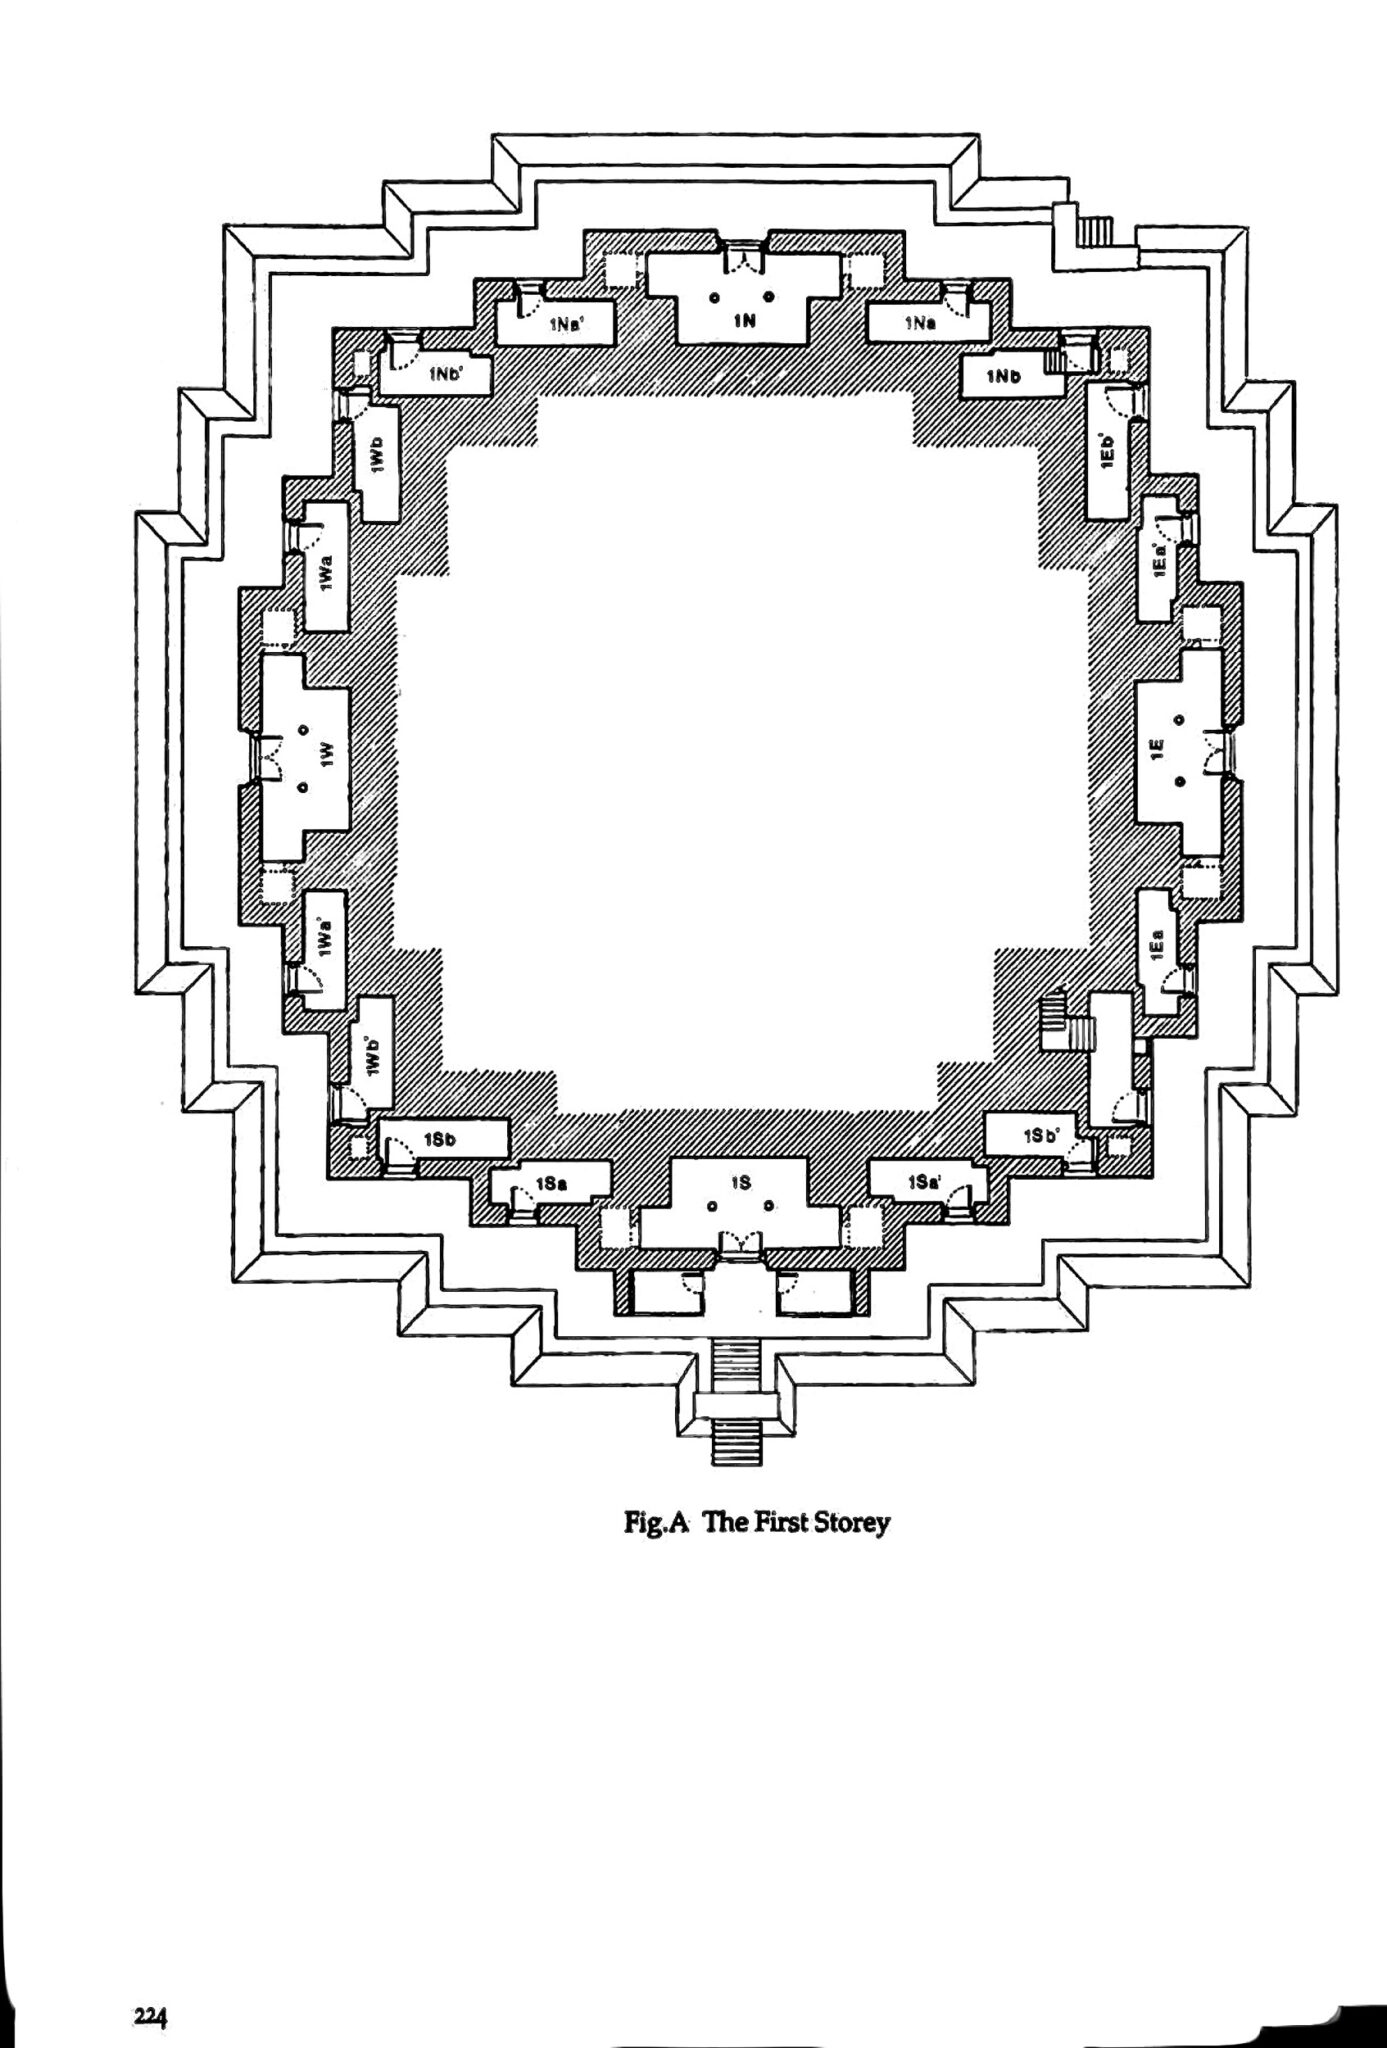 Floor plan describing one level of religious structure in circular shape articulated by right angles; “Fig.A The First Storey” at bottom center